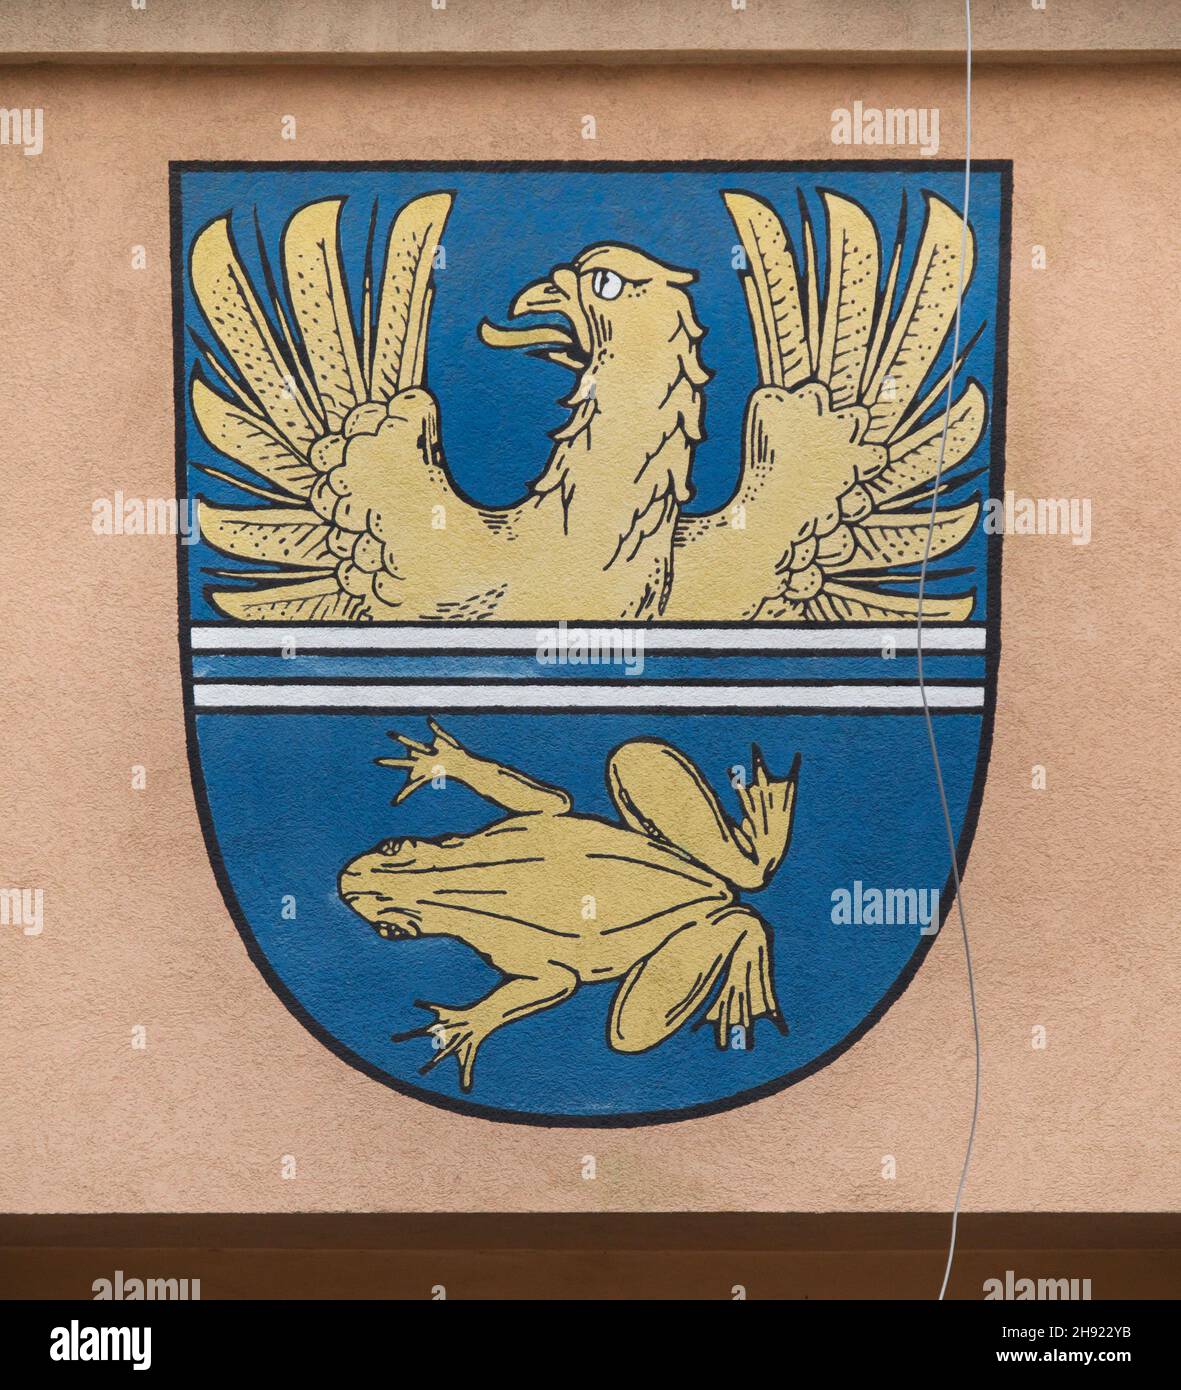 Coat of arms of the village of Tršice depicted on the building of the municipality council in Tršice near Olomouc in North Moravia, Czech Republic. Stock Photo